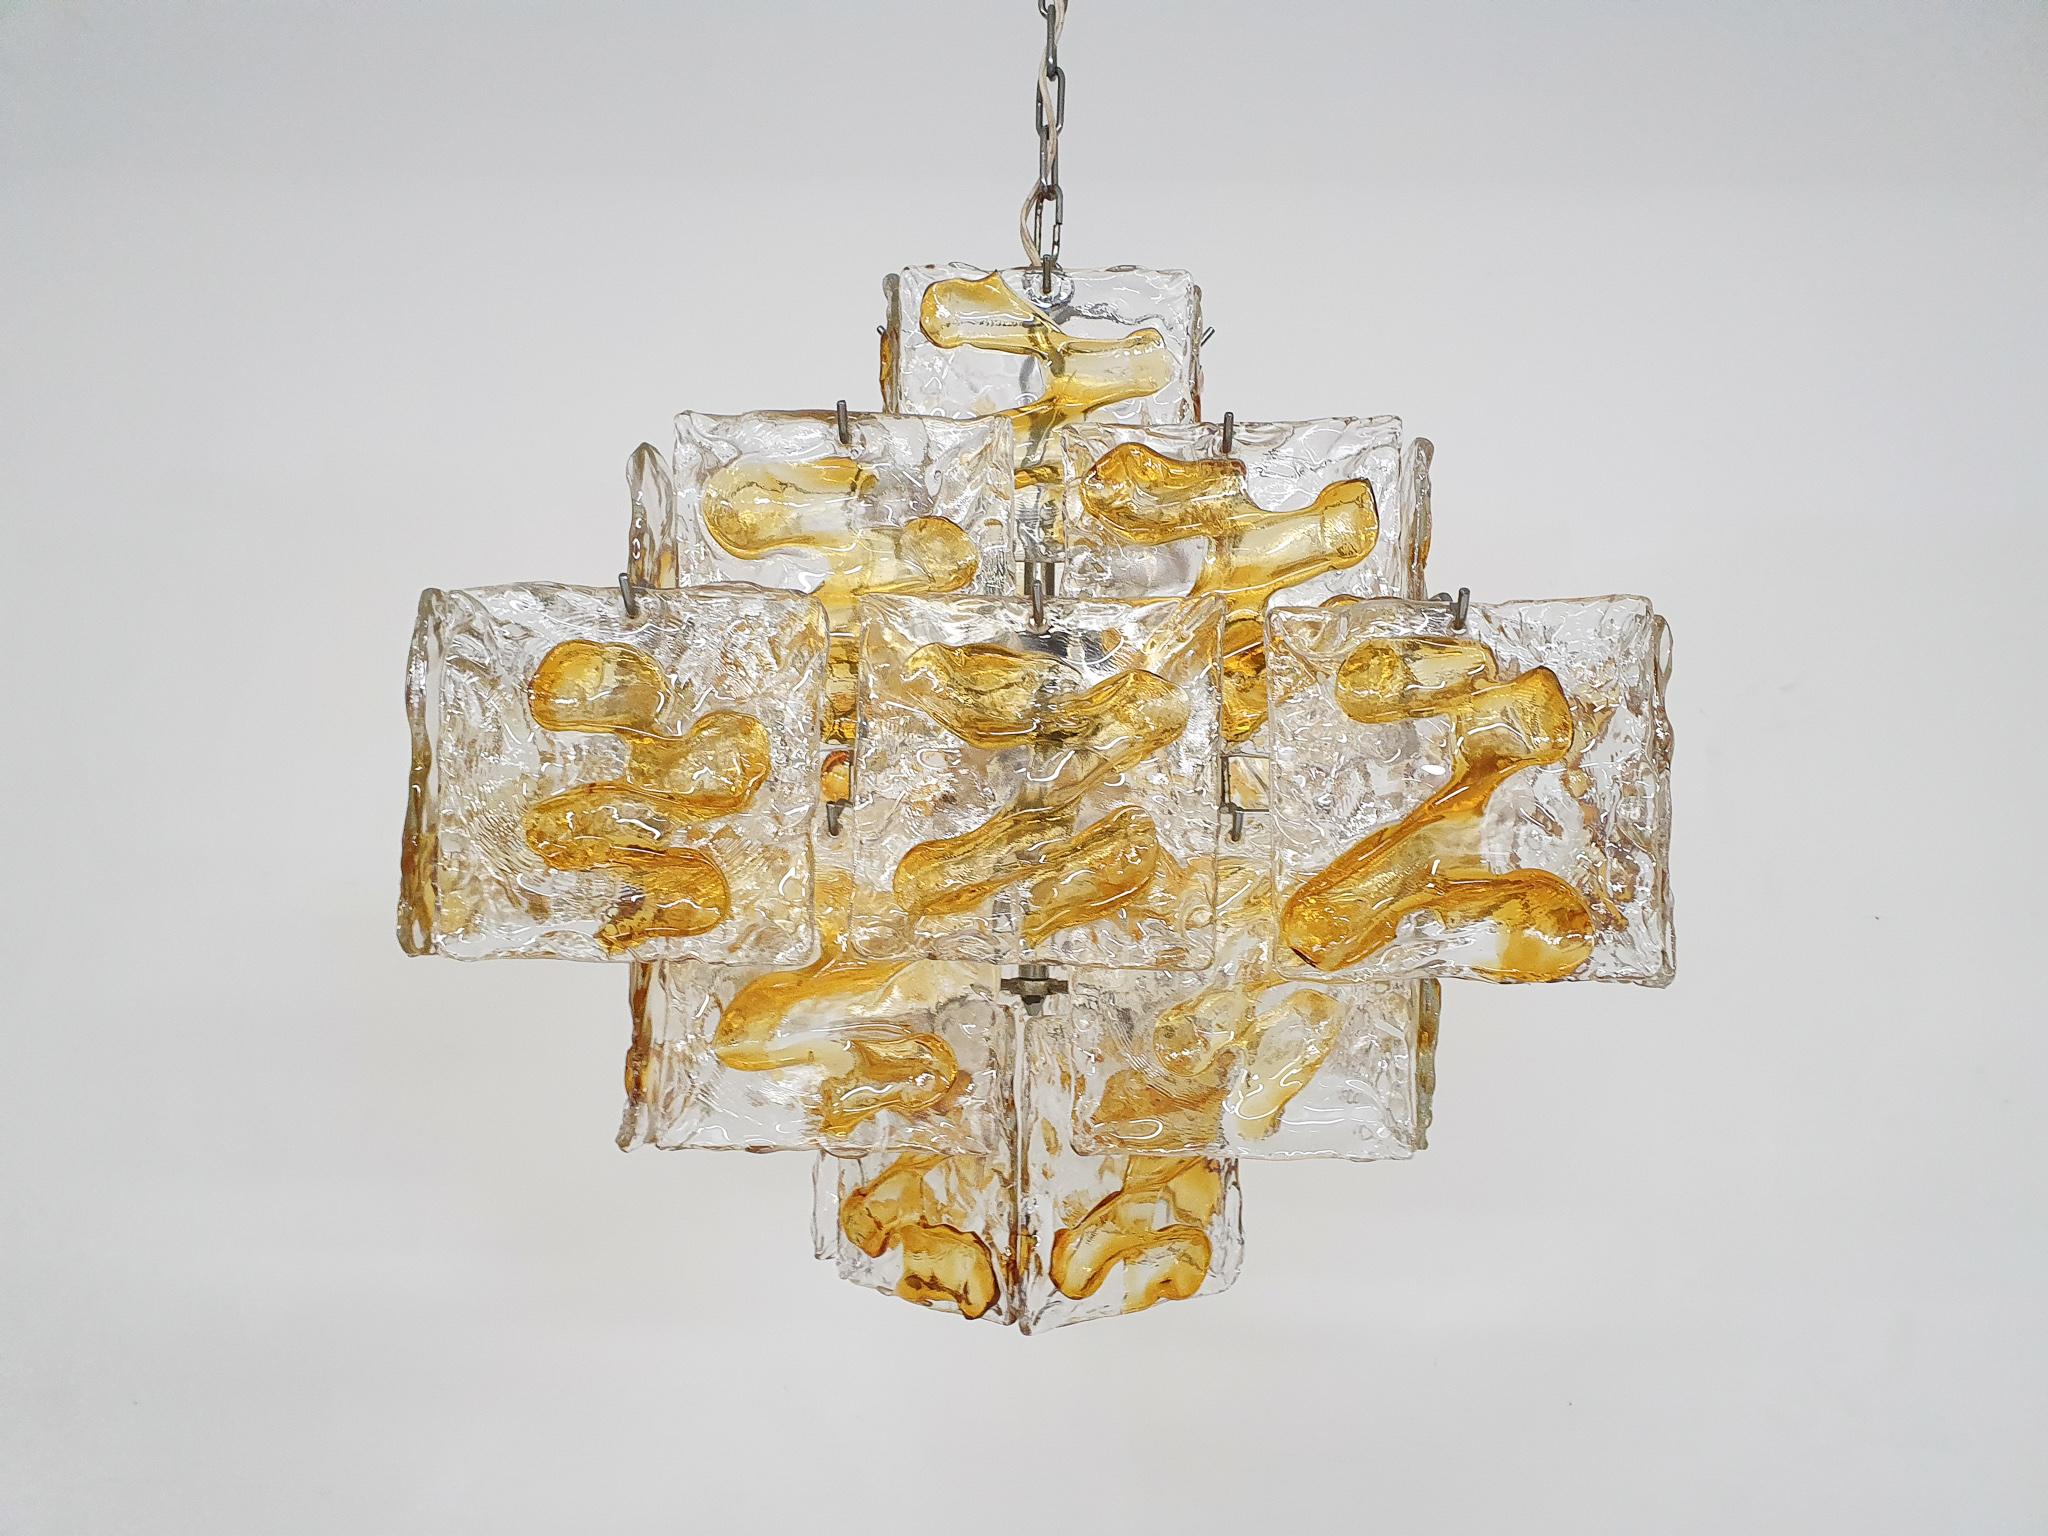 Chandelier with murano glass squares in transparant and amber glass.
The lamp places 8 E14 light bulbs.
Total length with chain is 140 cm.